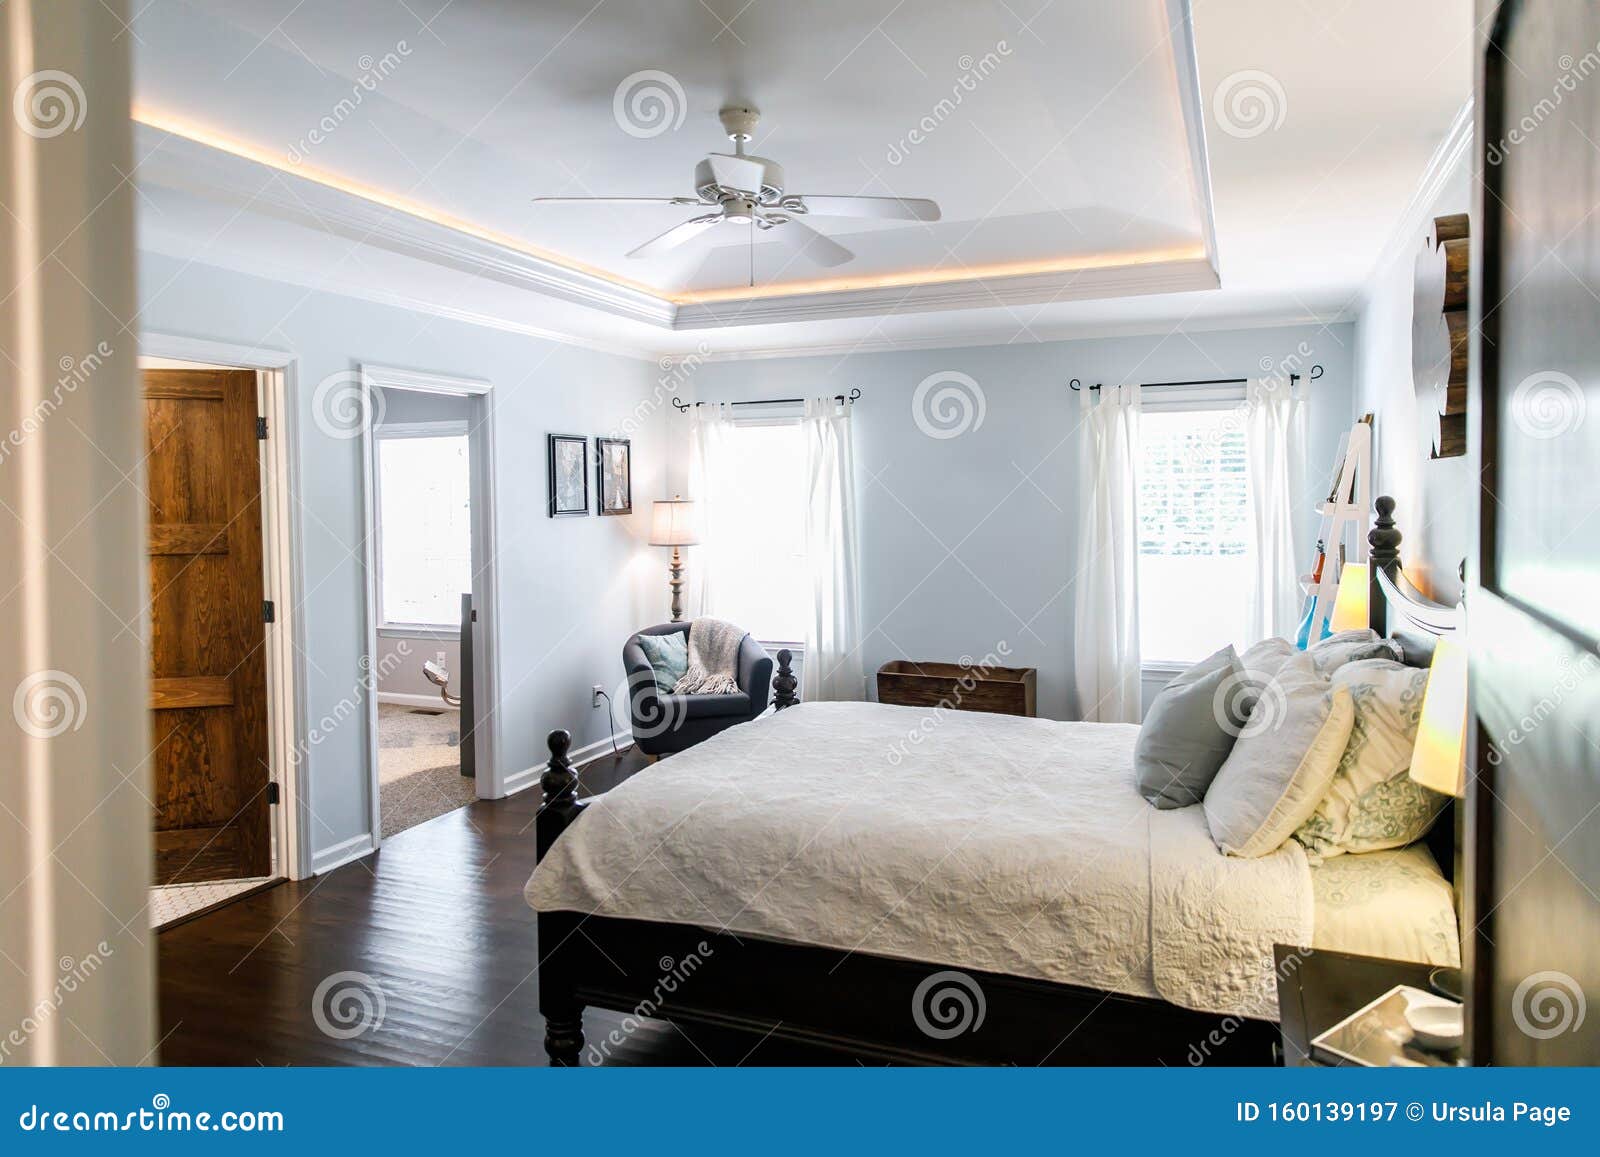 Master Bedroom With King Size Bed And Tray Ceilings With Uplighting And Hradwood Floors Stock Image Image Of Apartment Decor 160139197